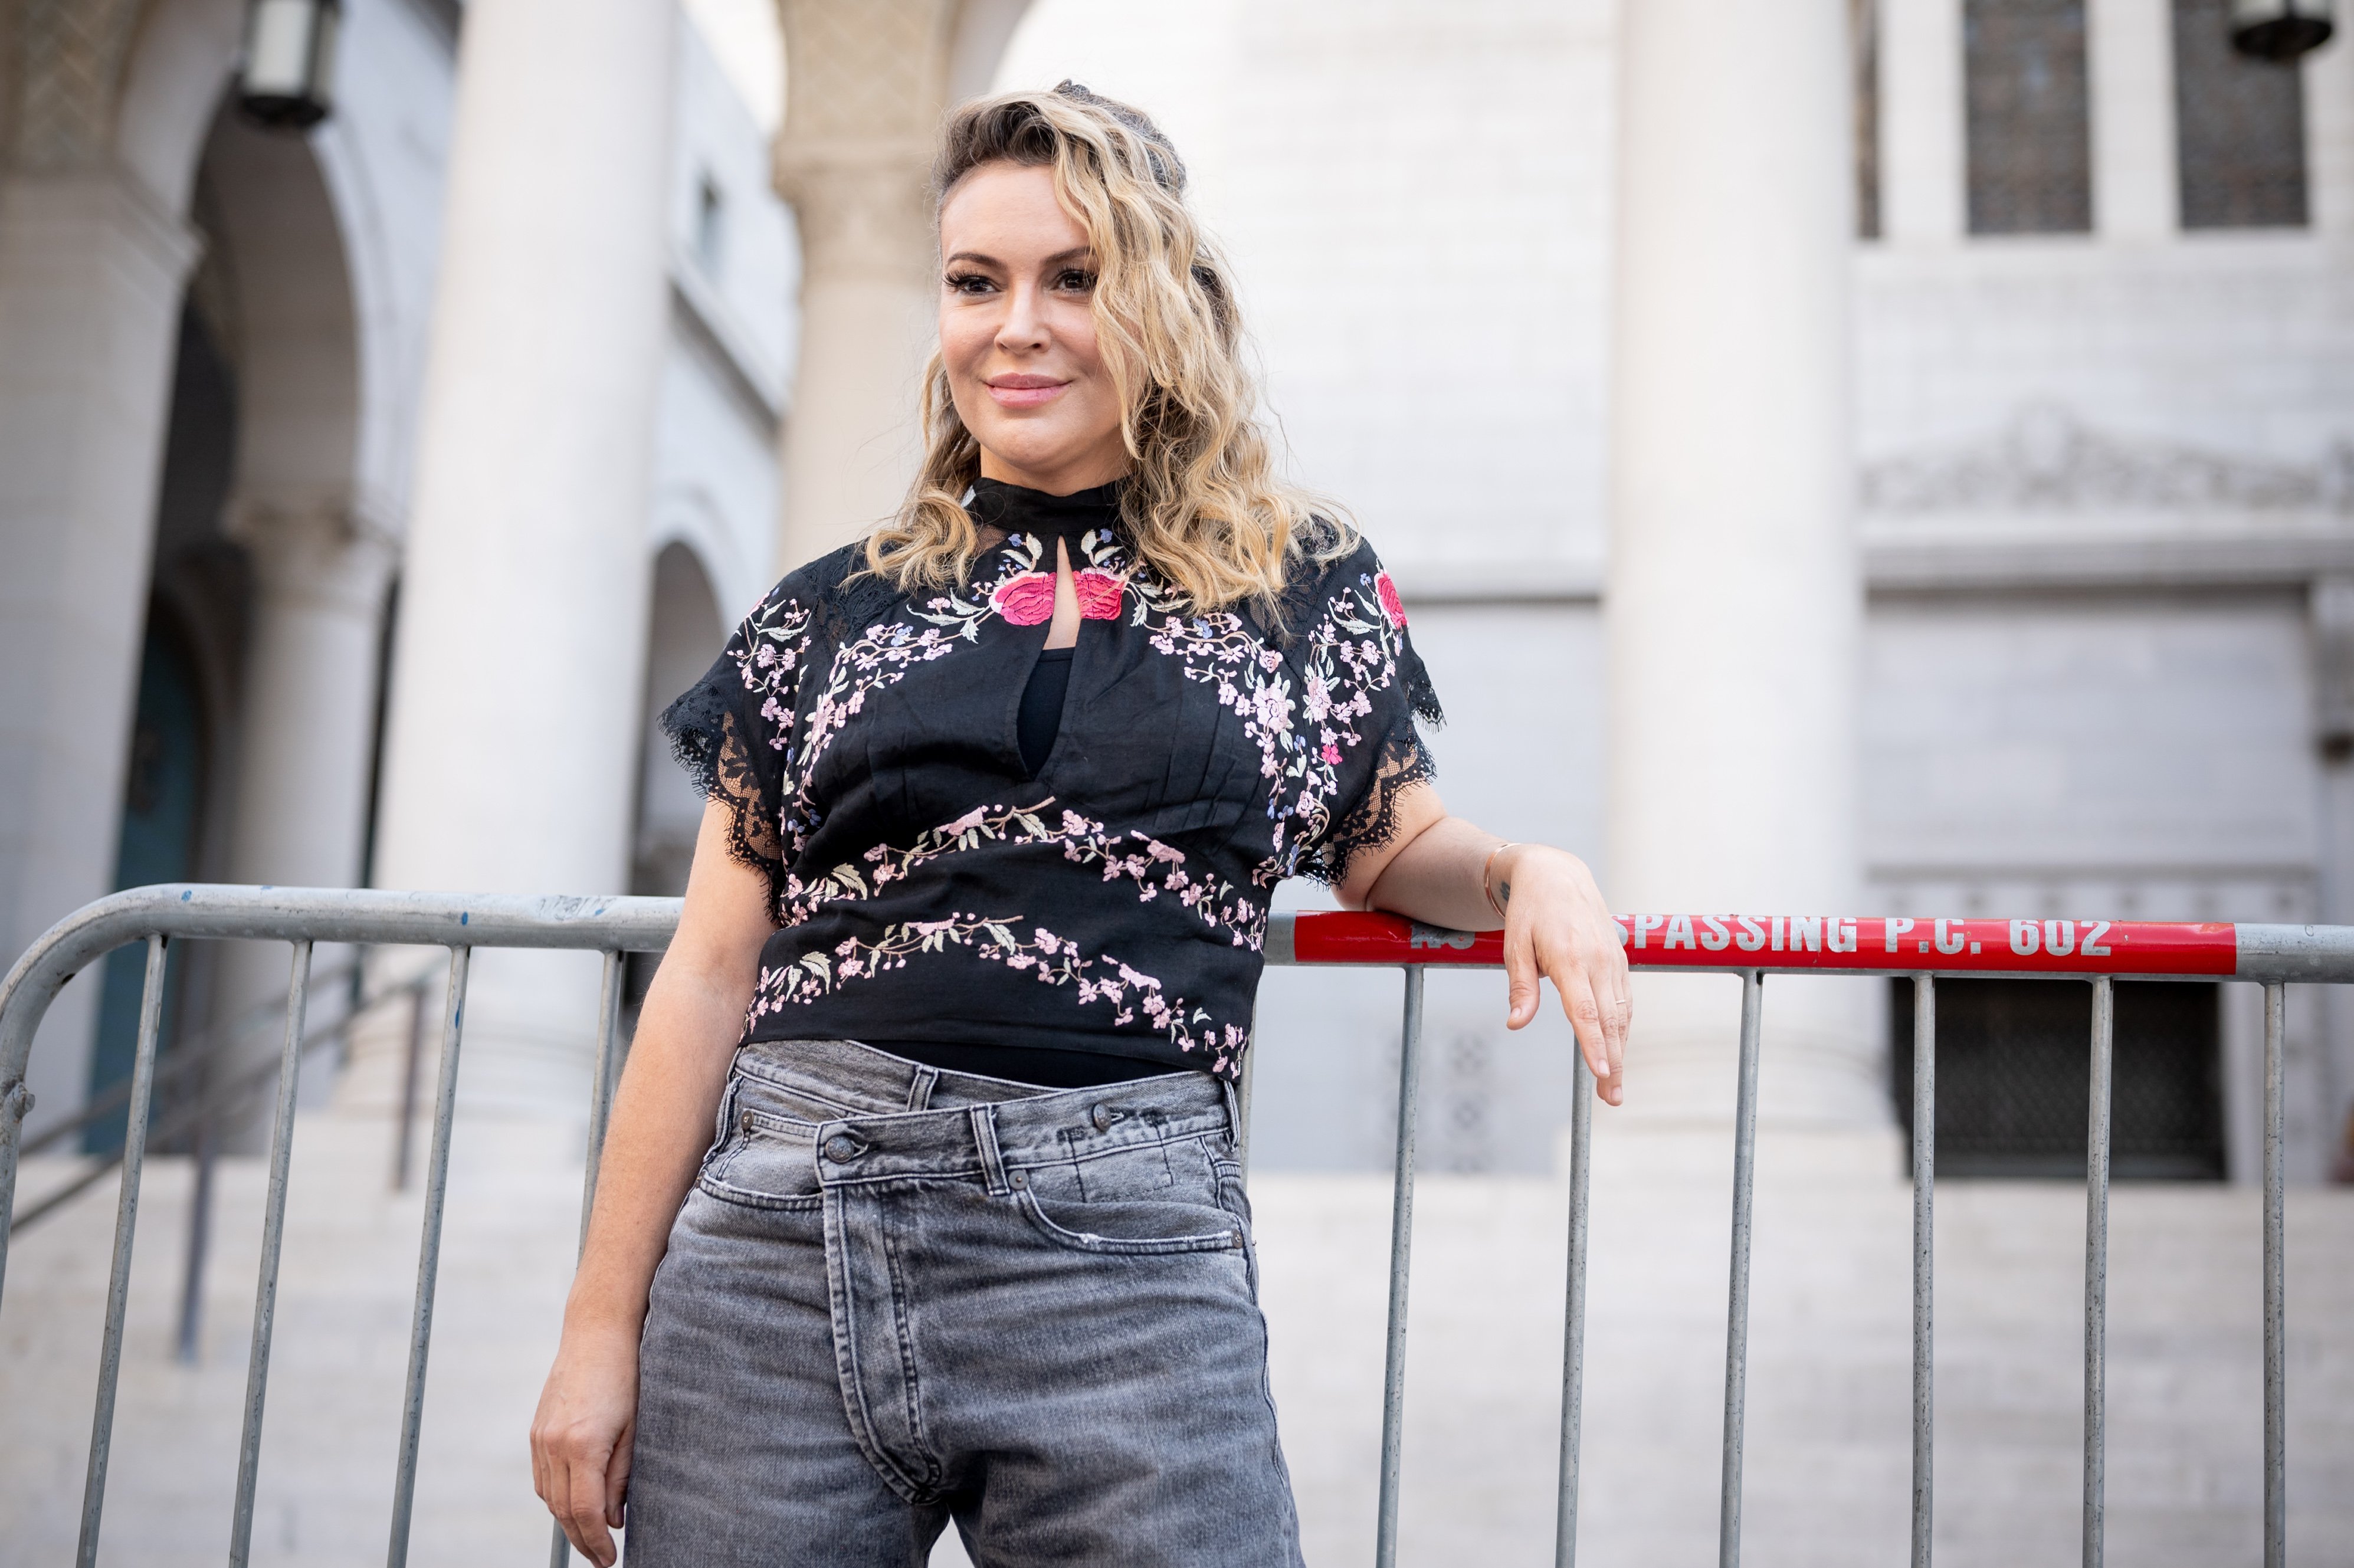 Alyssa Milano at the Women's March 4 Reproductive Rights in LA, 2021. | Source: Getty Images 